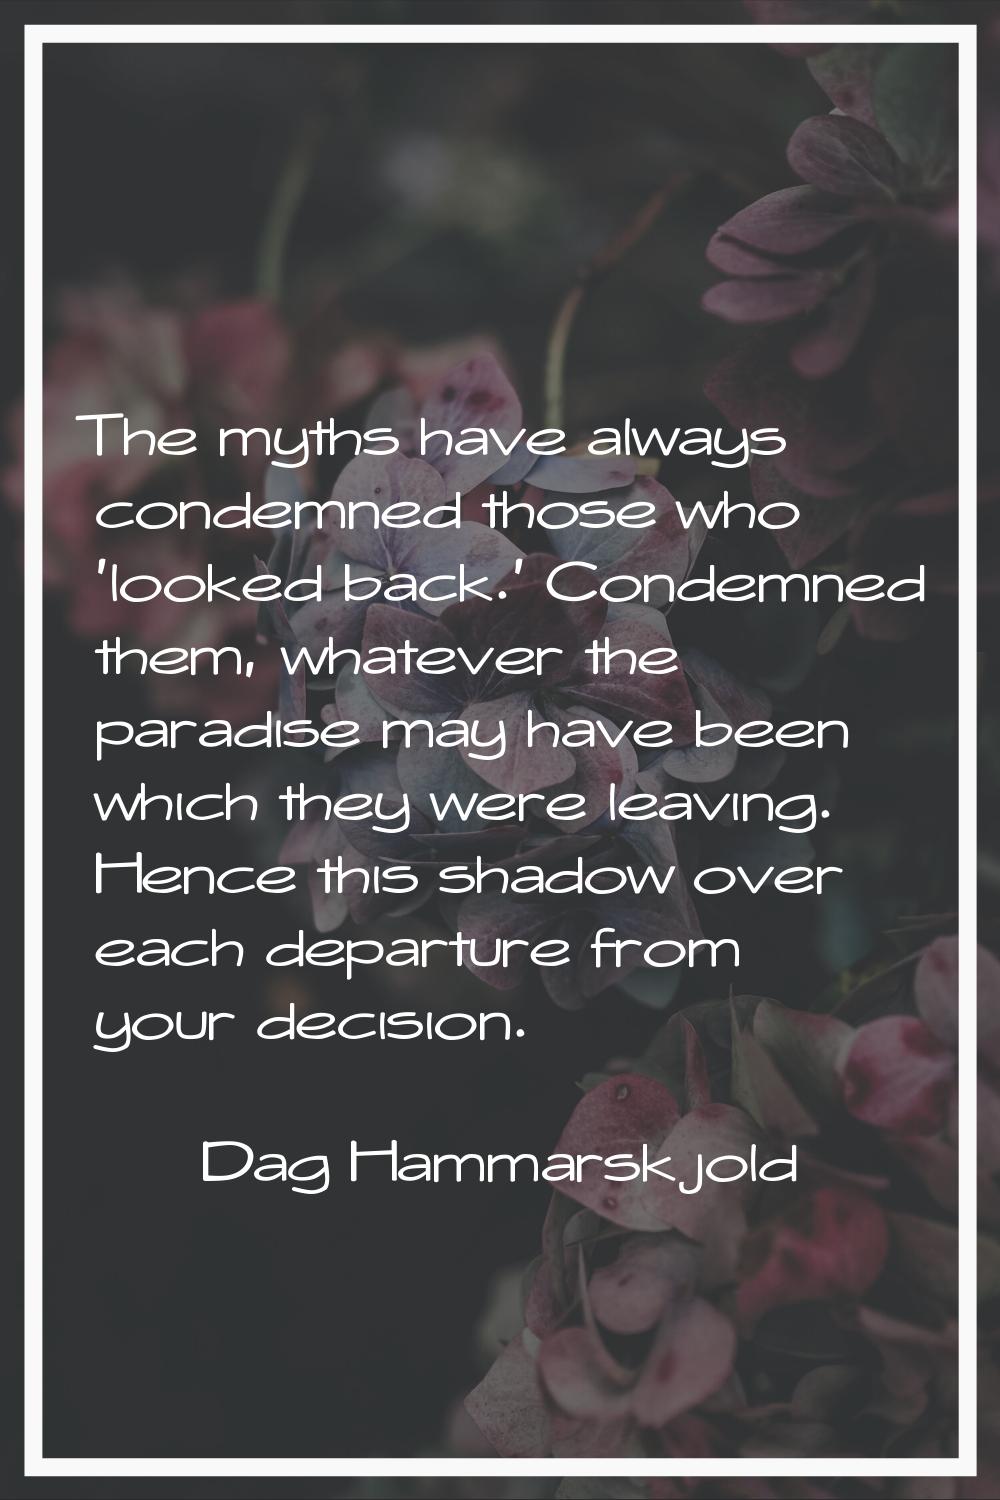 The myths have always condemned those who 'looked back.' Condemned them, whatever the paradise may 